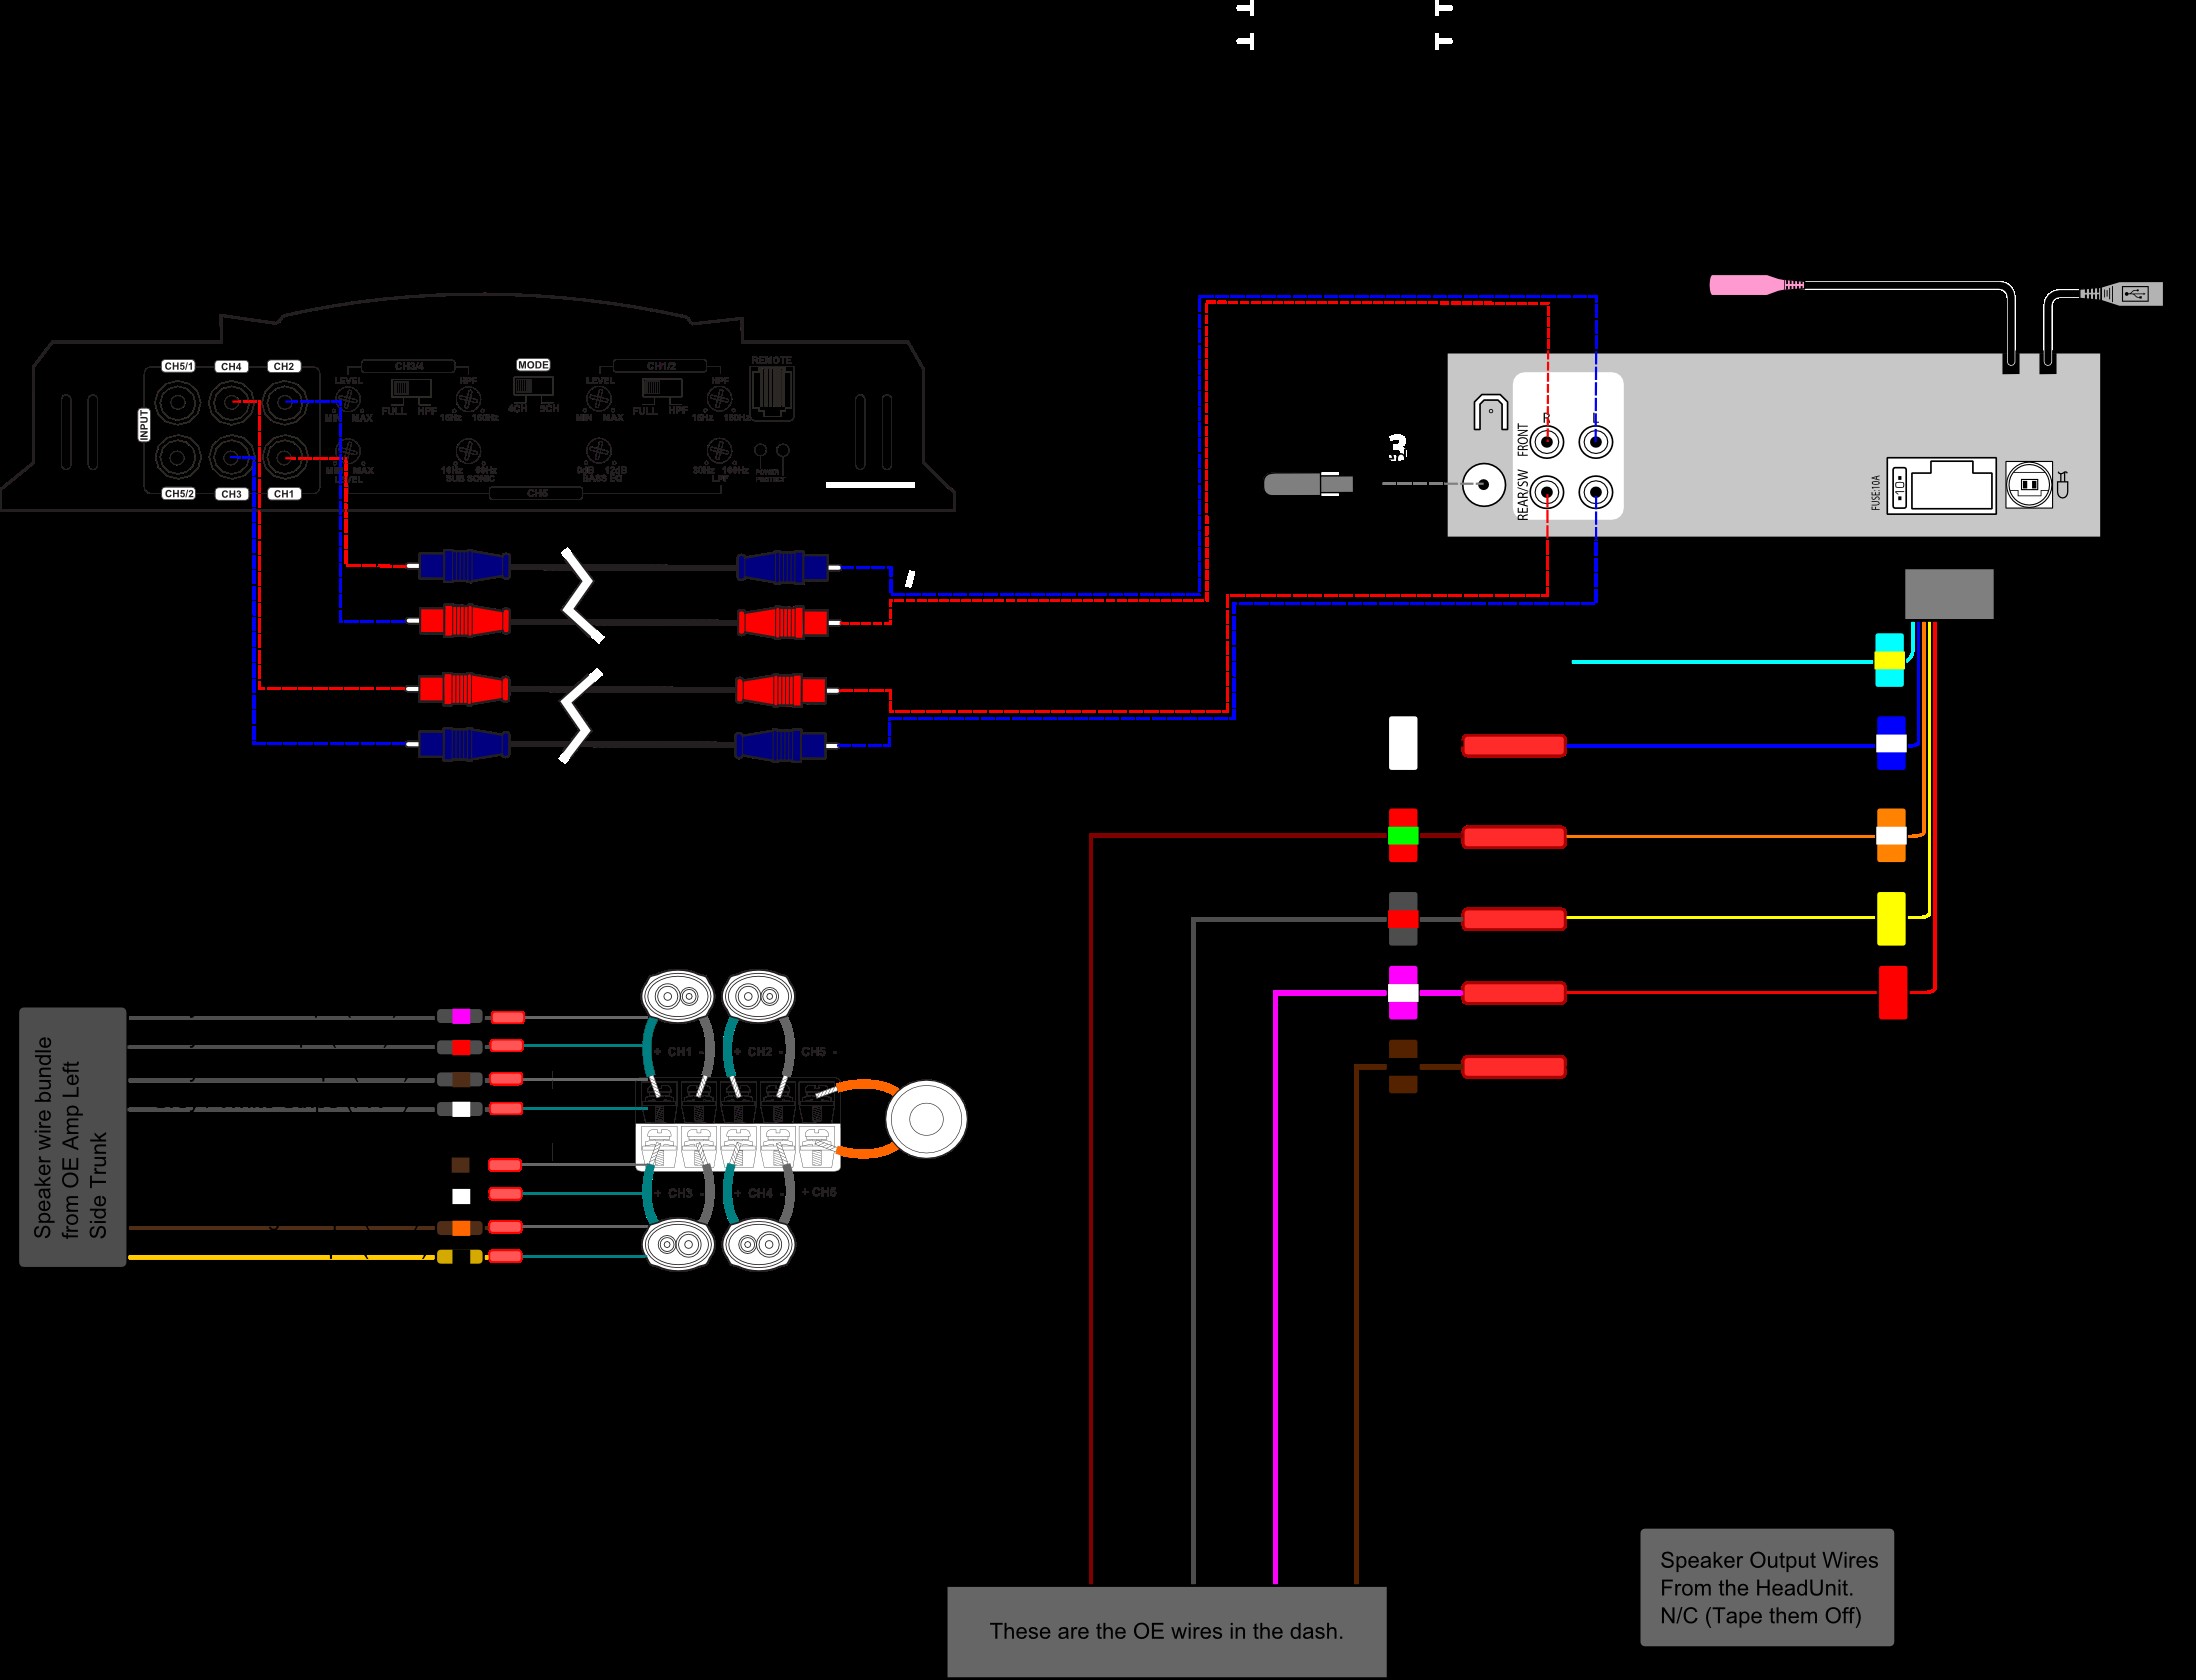 Wiring Diagram for Car Stereo with Amplifier Car Audio Wiring Diagrams Jvc Stereo Diagram Color On within Auto Of Wiring Diagram for Car Stereo with Amplifier